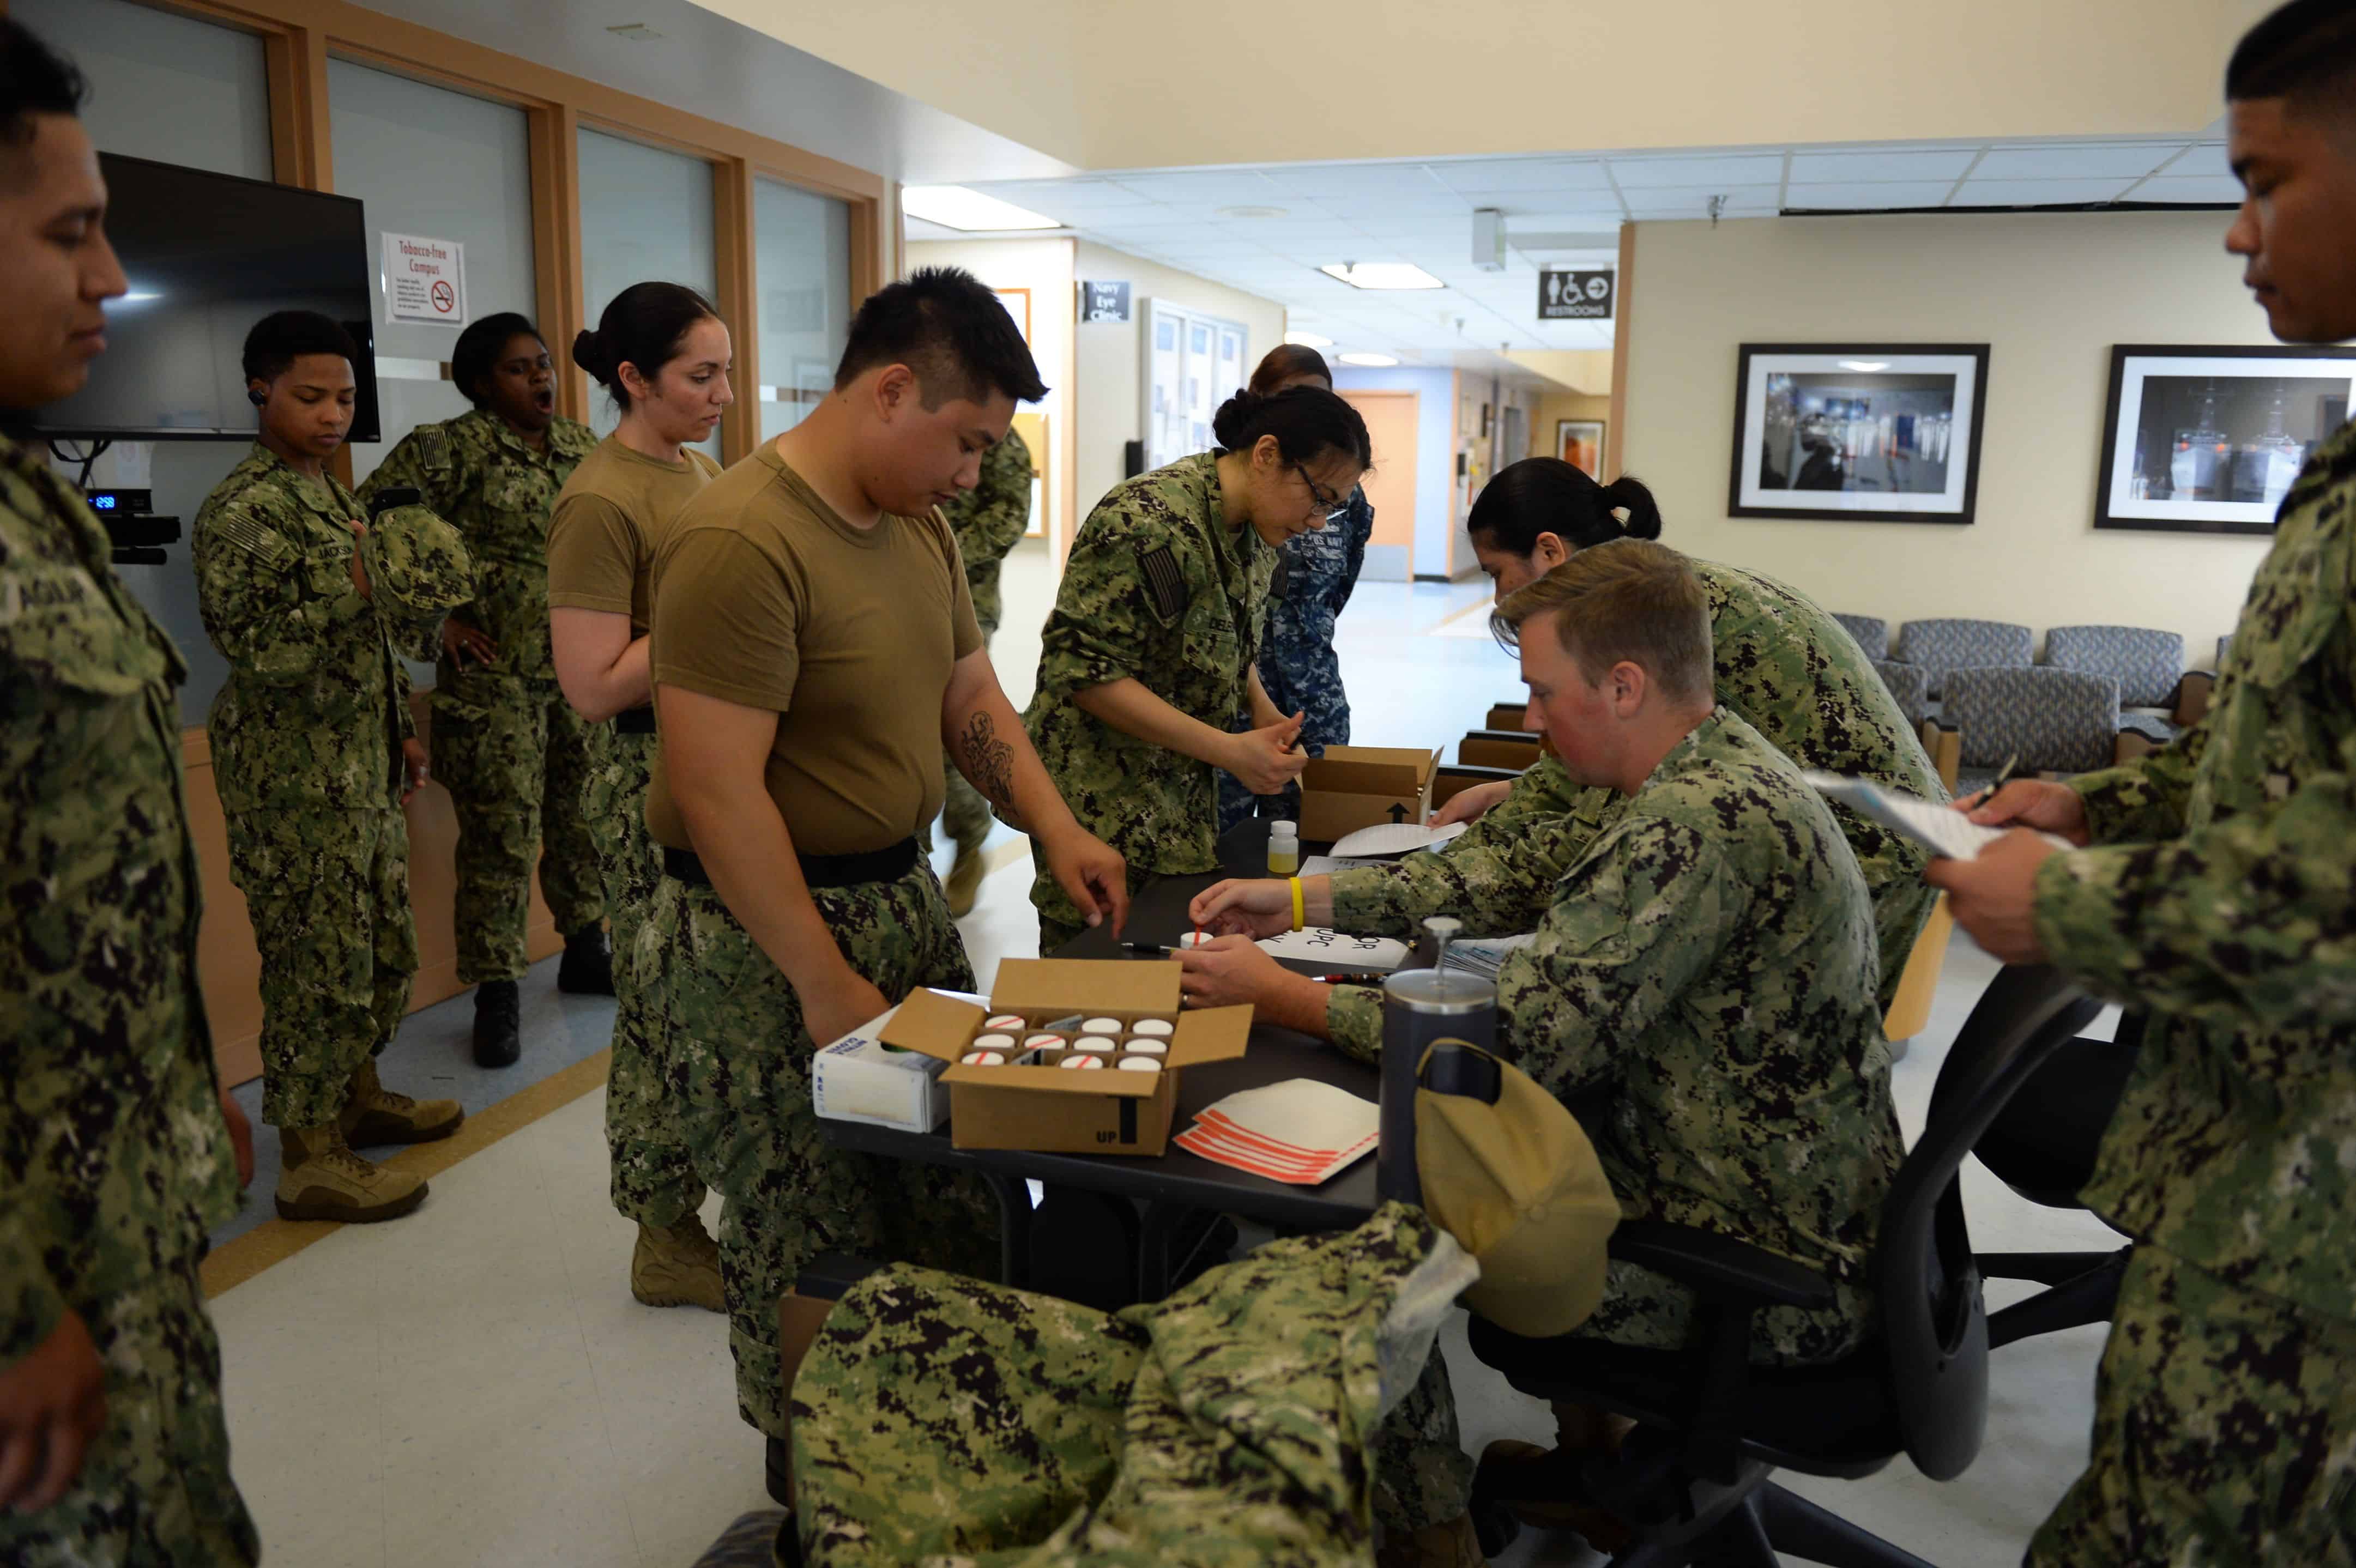 SAN DIEGO (July 14, 2019) Navy Operational Support Center North Island conducts a monthly urinalysis test of assigned Reserve Sailors July 14 on Naval Air Station North Island. The NOSC collected 62 samples from Sailors that day to comply with zero tolerance drug use standards within the Navy. (U.S. Navy photo by Mass Communication Specialist 1st Class Shannon Chambers)